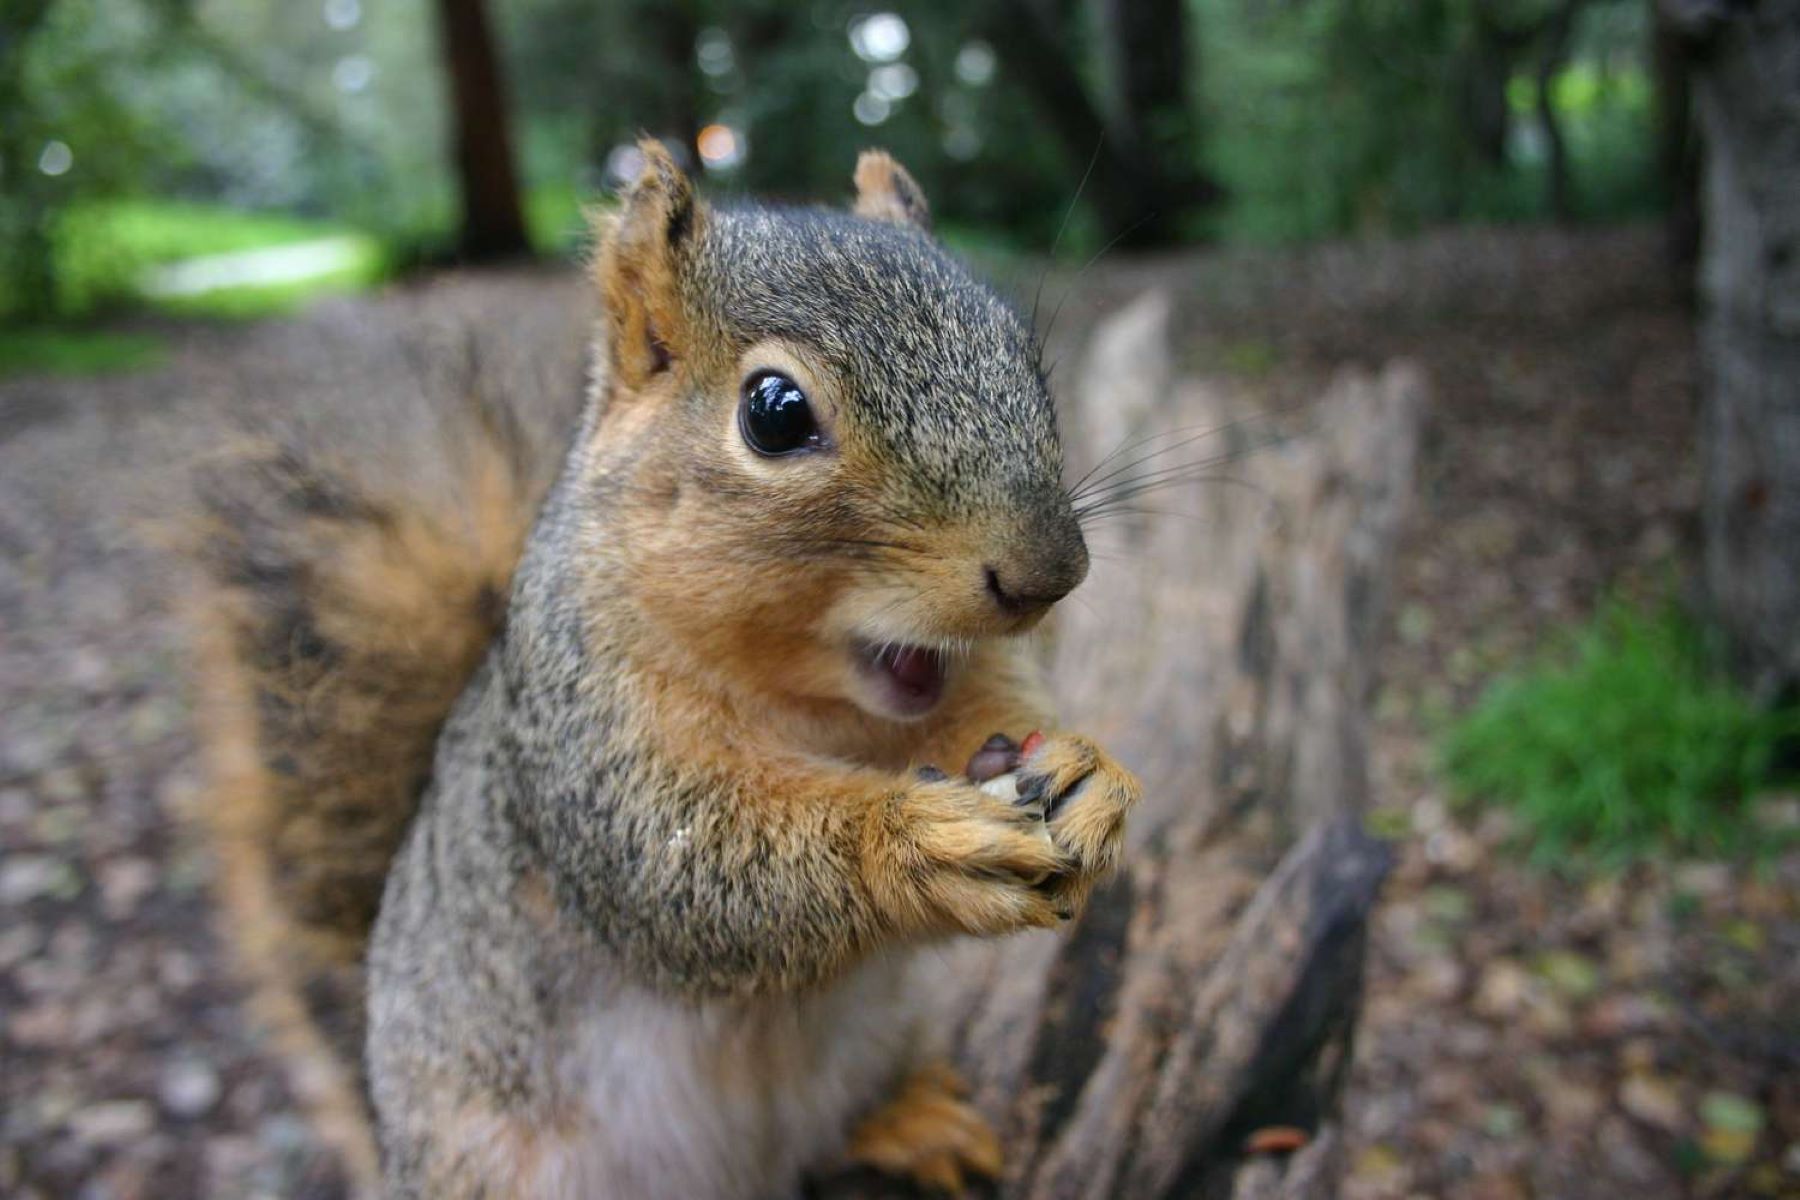 Discover The Enormous Squirrels In The World's Most Surprising Locations!